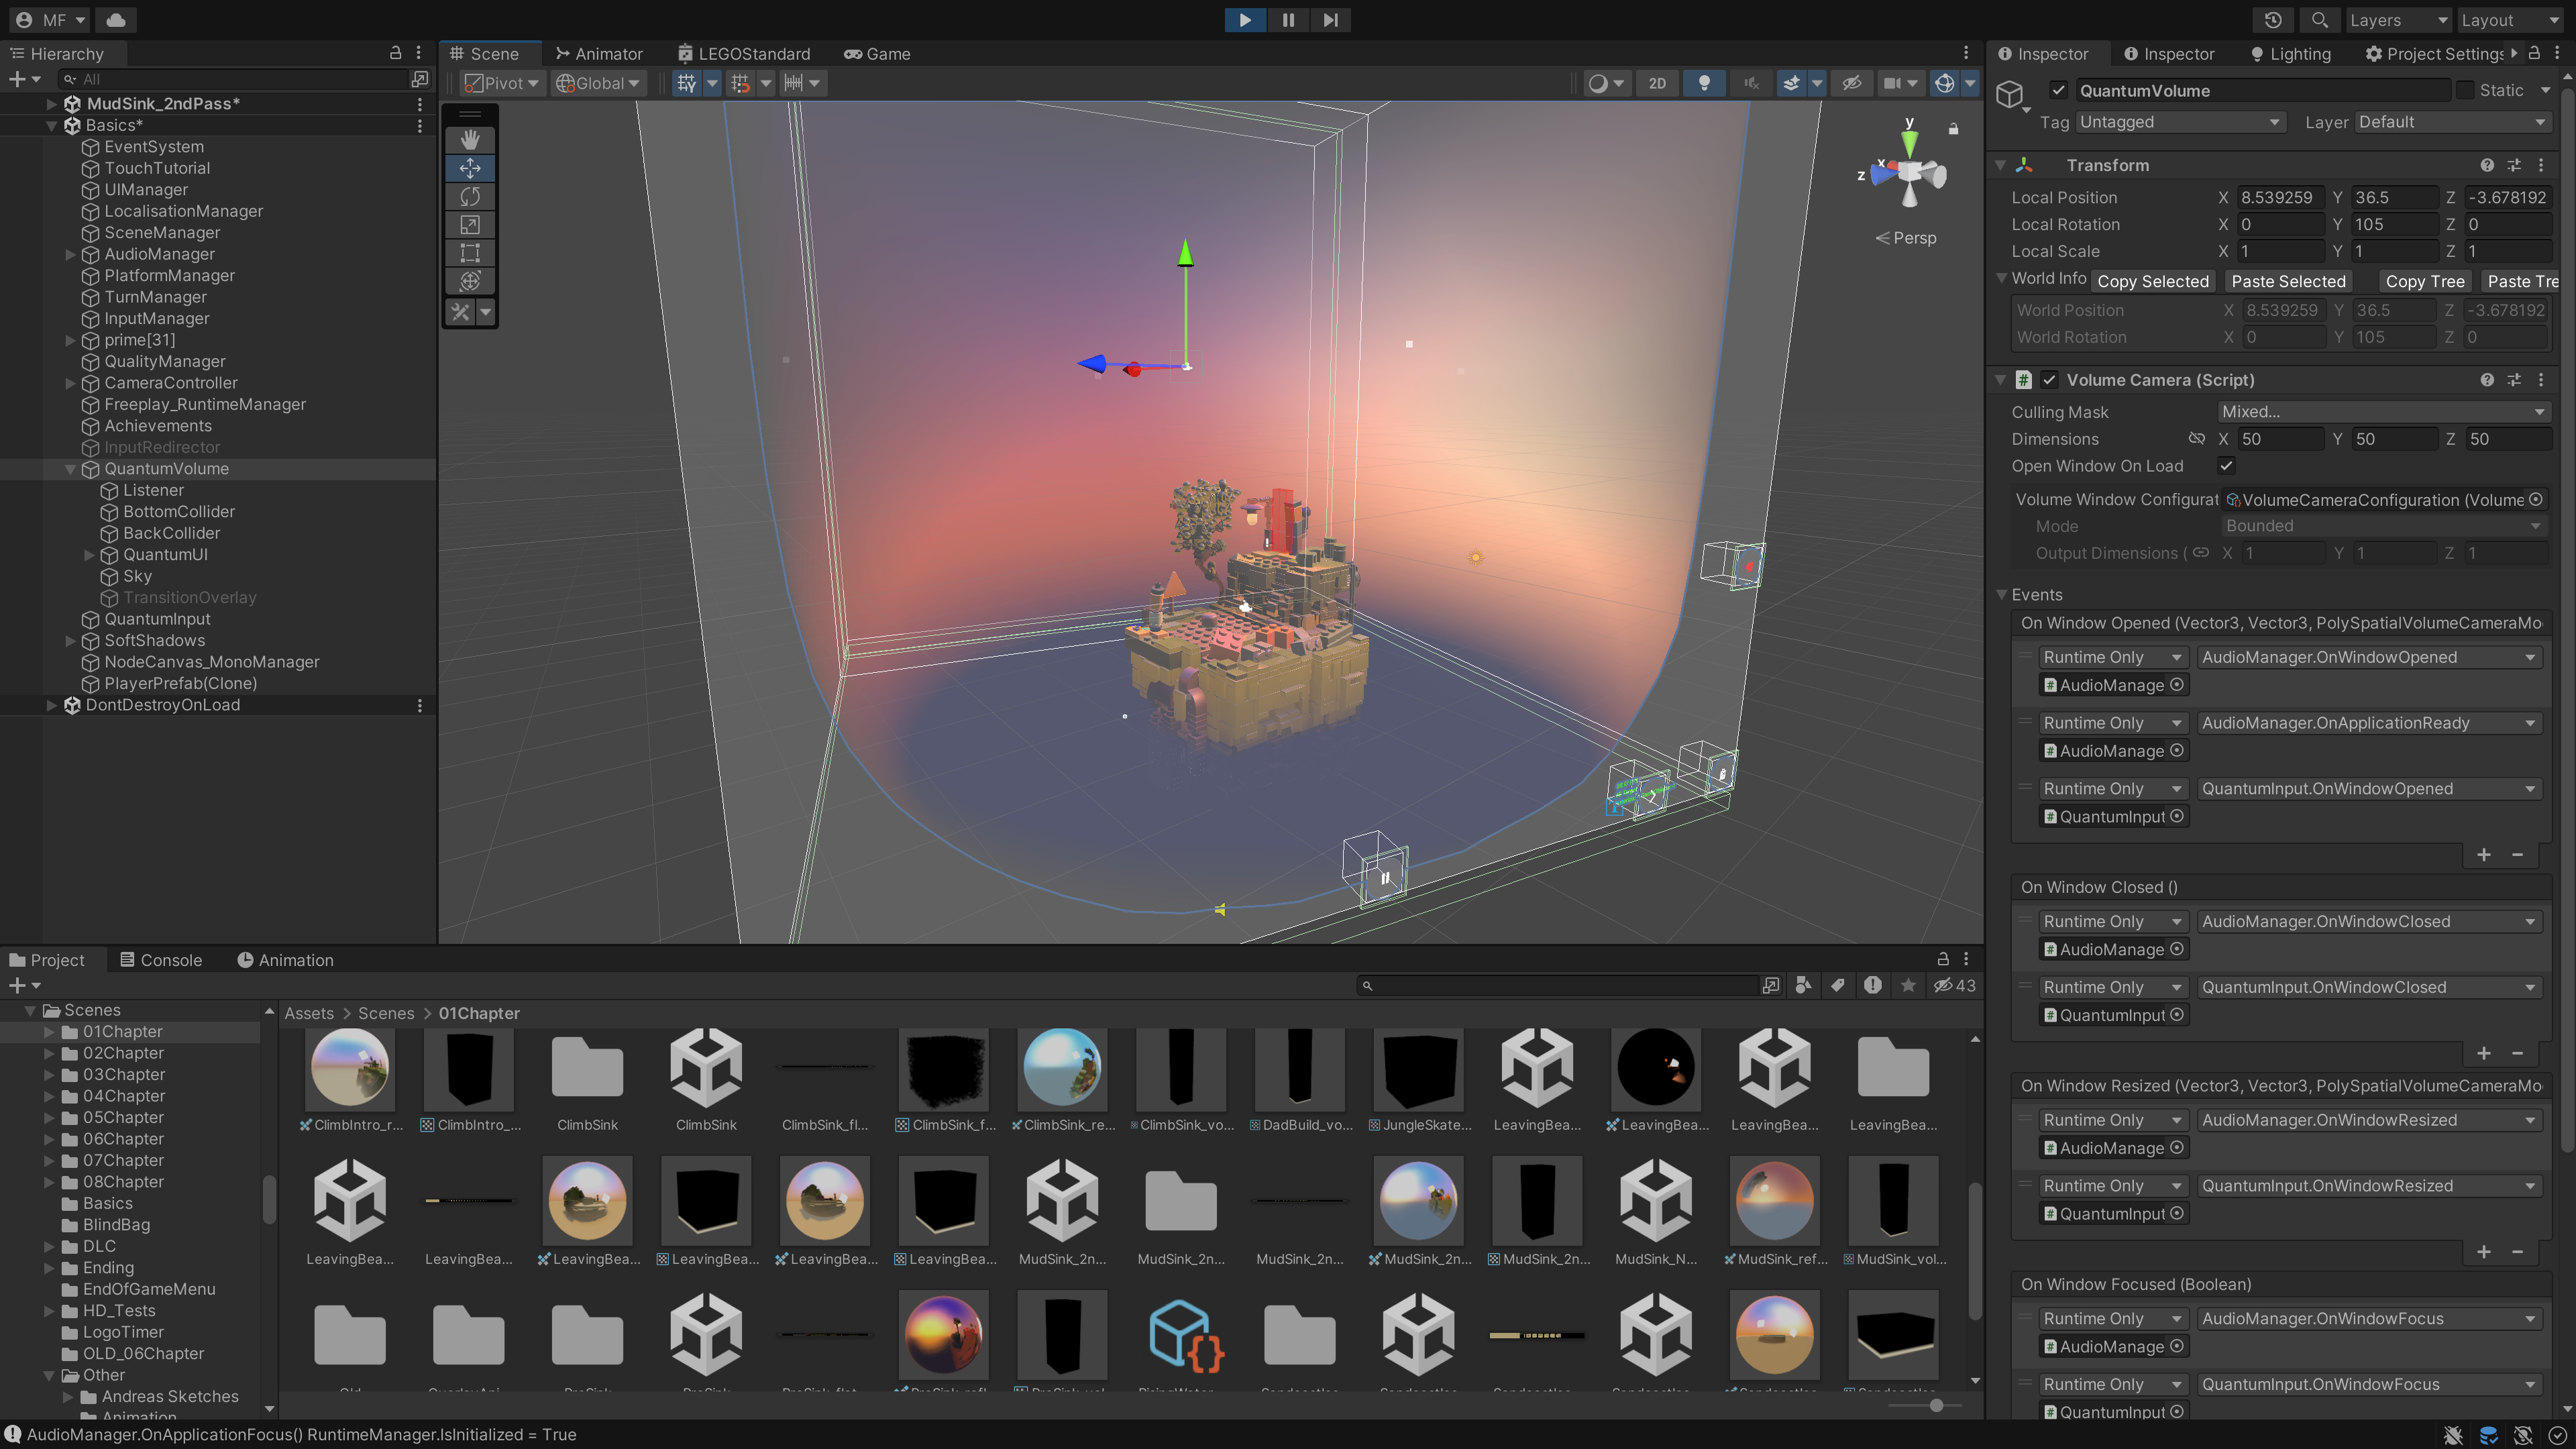 In-Editor shot of the Light Brick Studio team setting up the UI and events for the PolySpatial VolumeCamera component